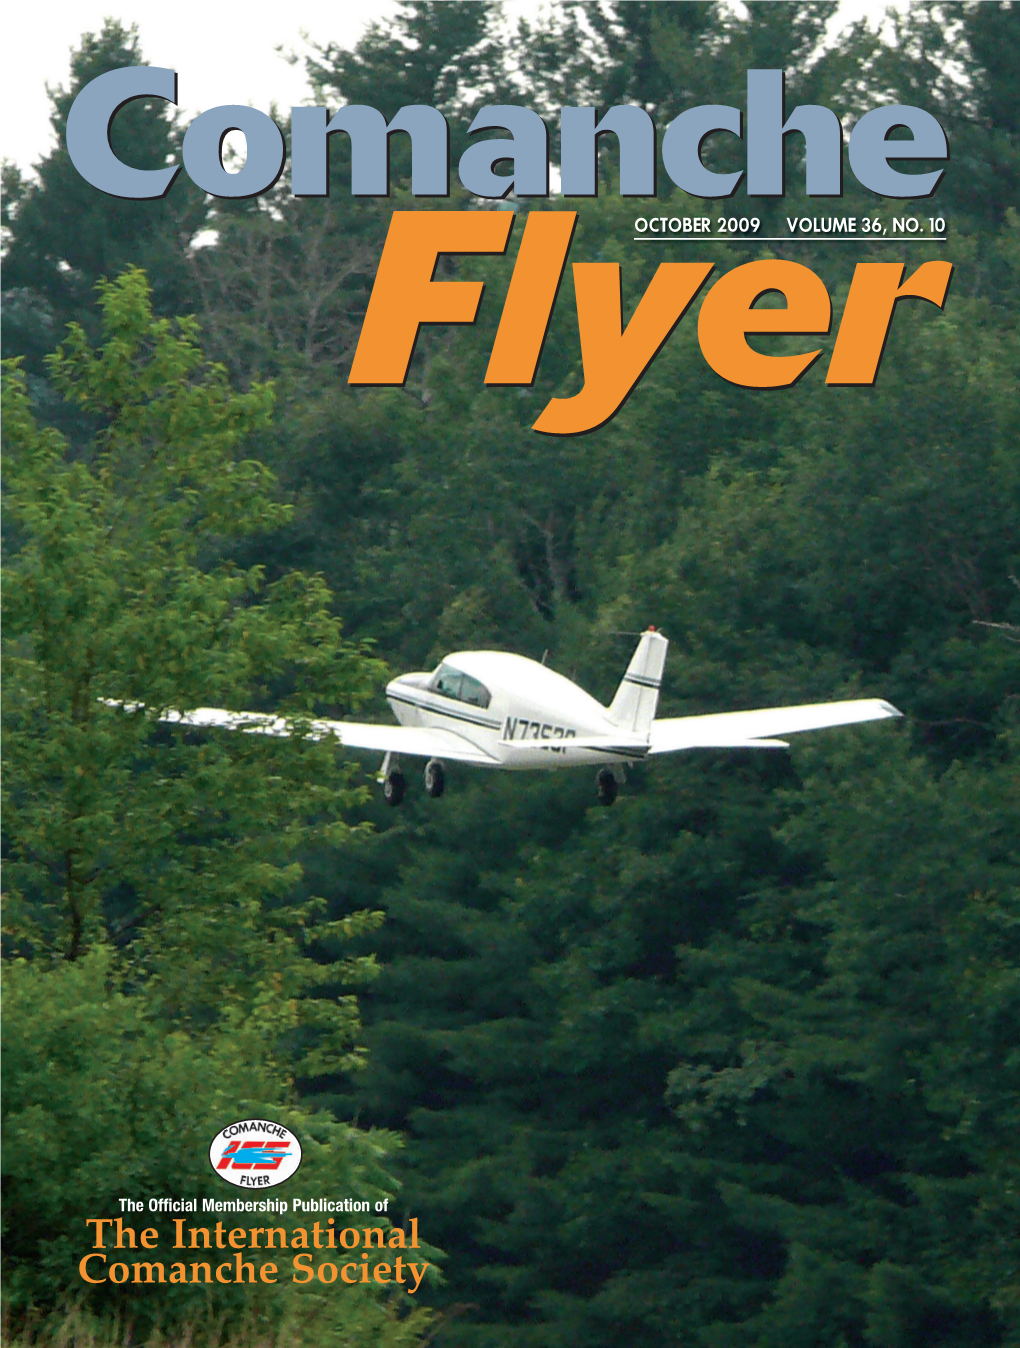 A Buyer's Guide to the Piper Comanche by Dave Pyle, ICS #730